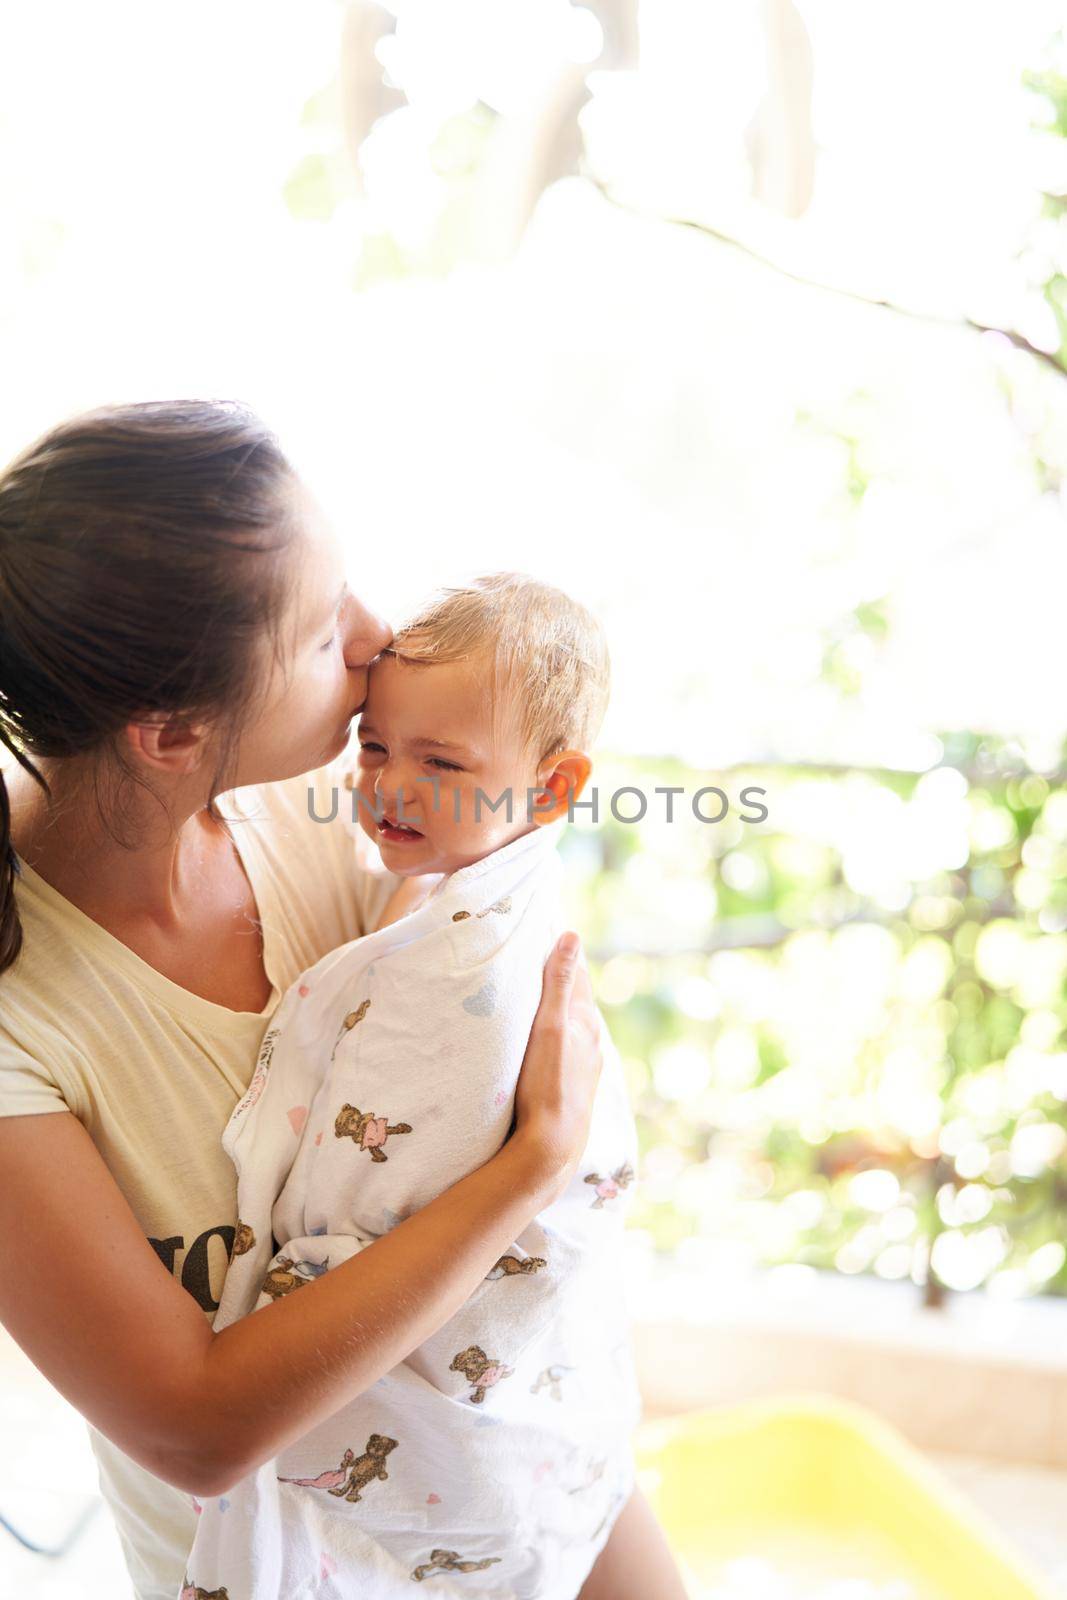 Mom kisses a whimpering baby holding him in her arms by Nadtochiy